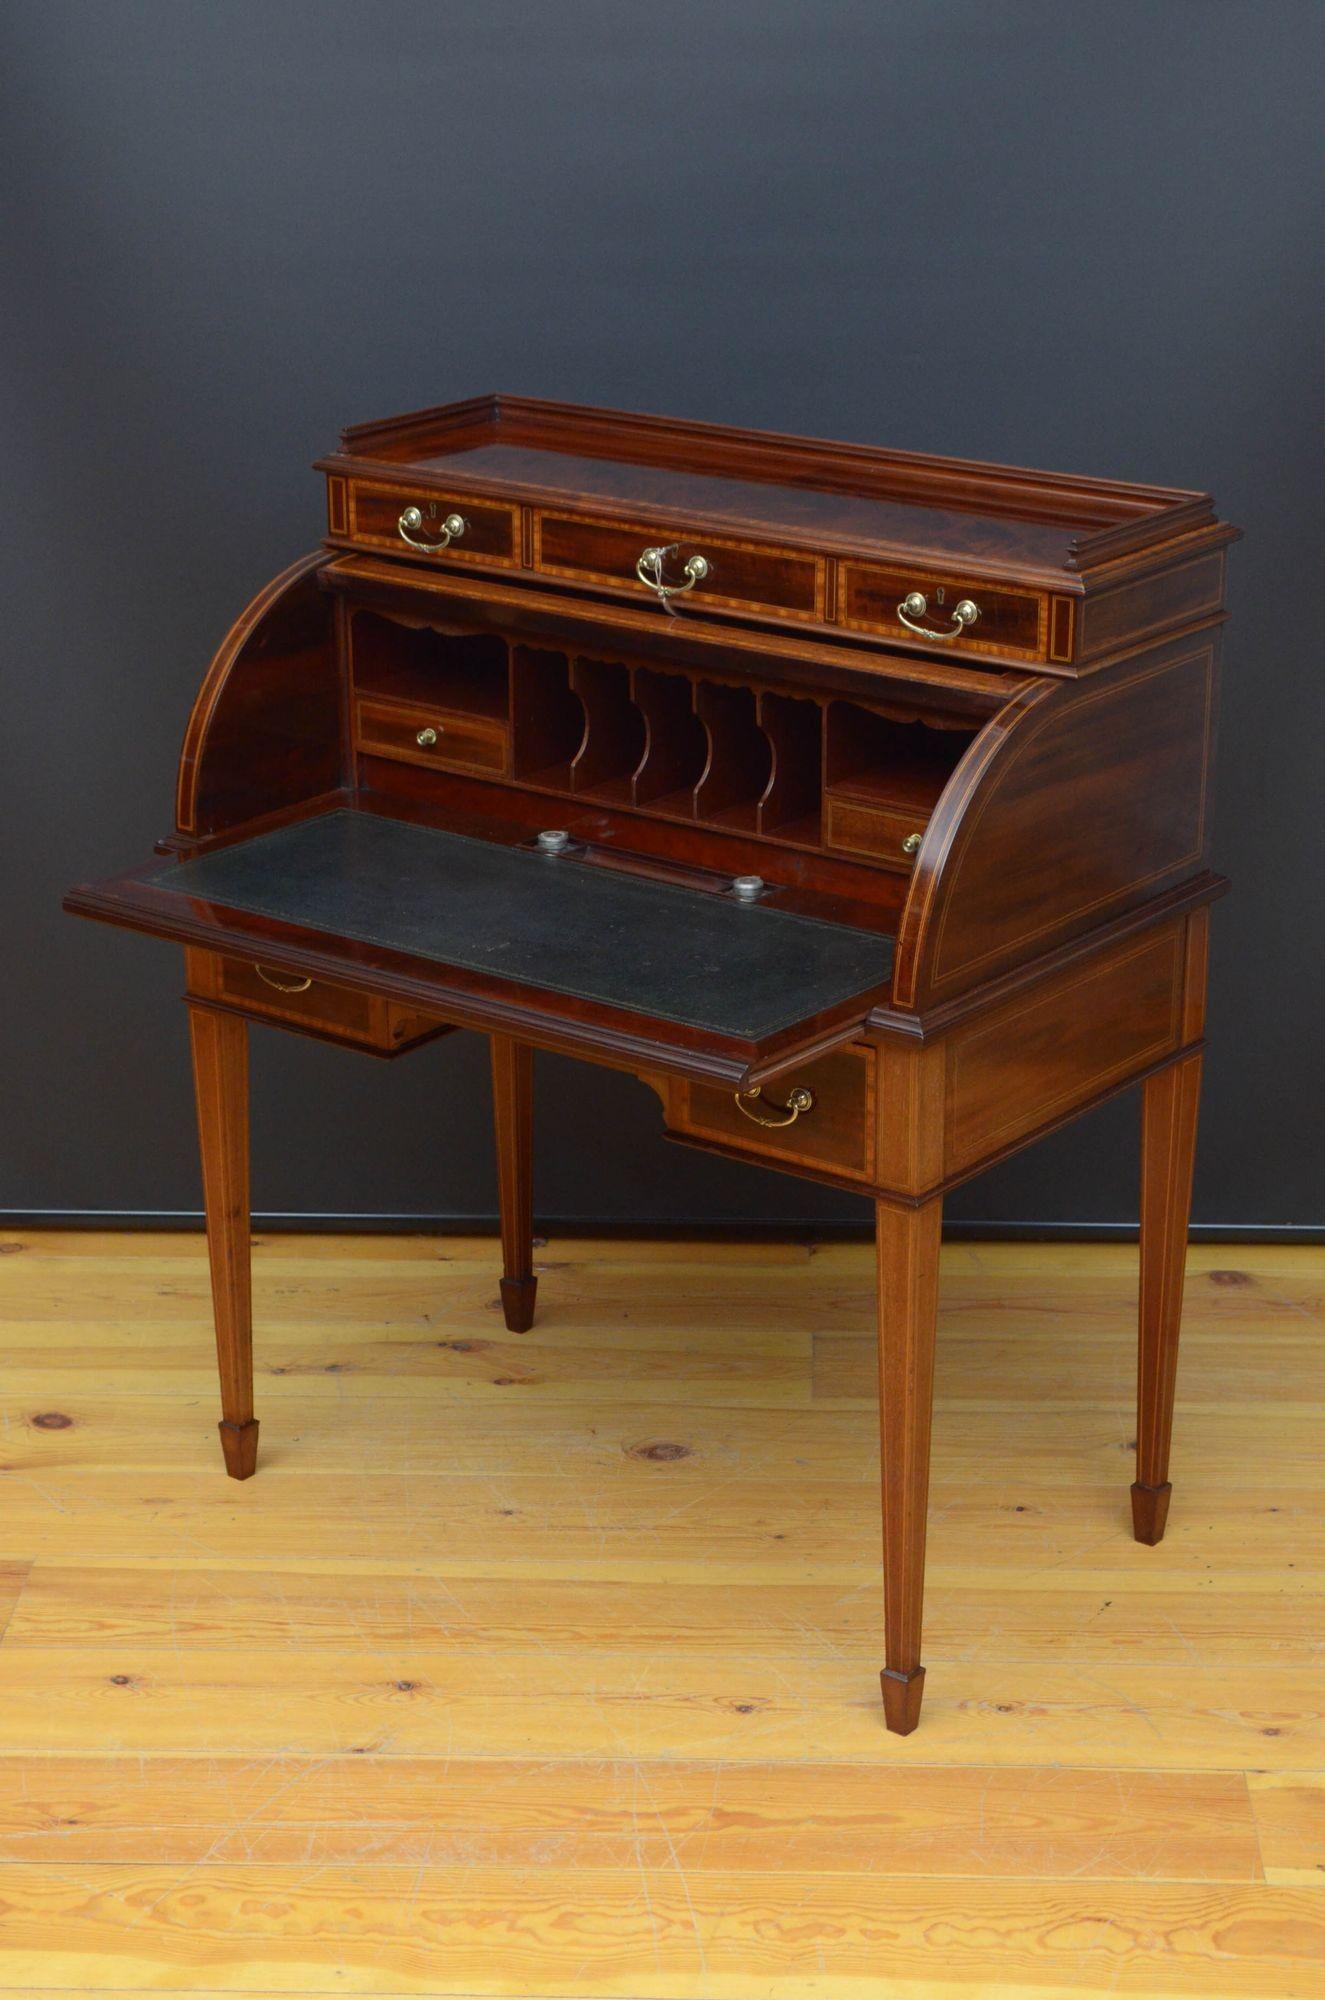 Exhibition Quality Mahogany Cylinder Desk, Maple & Co In Good Condition For Sale In Whaley Bridge, GB